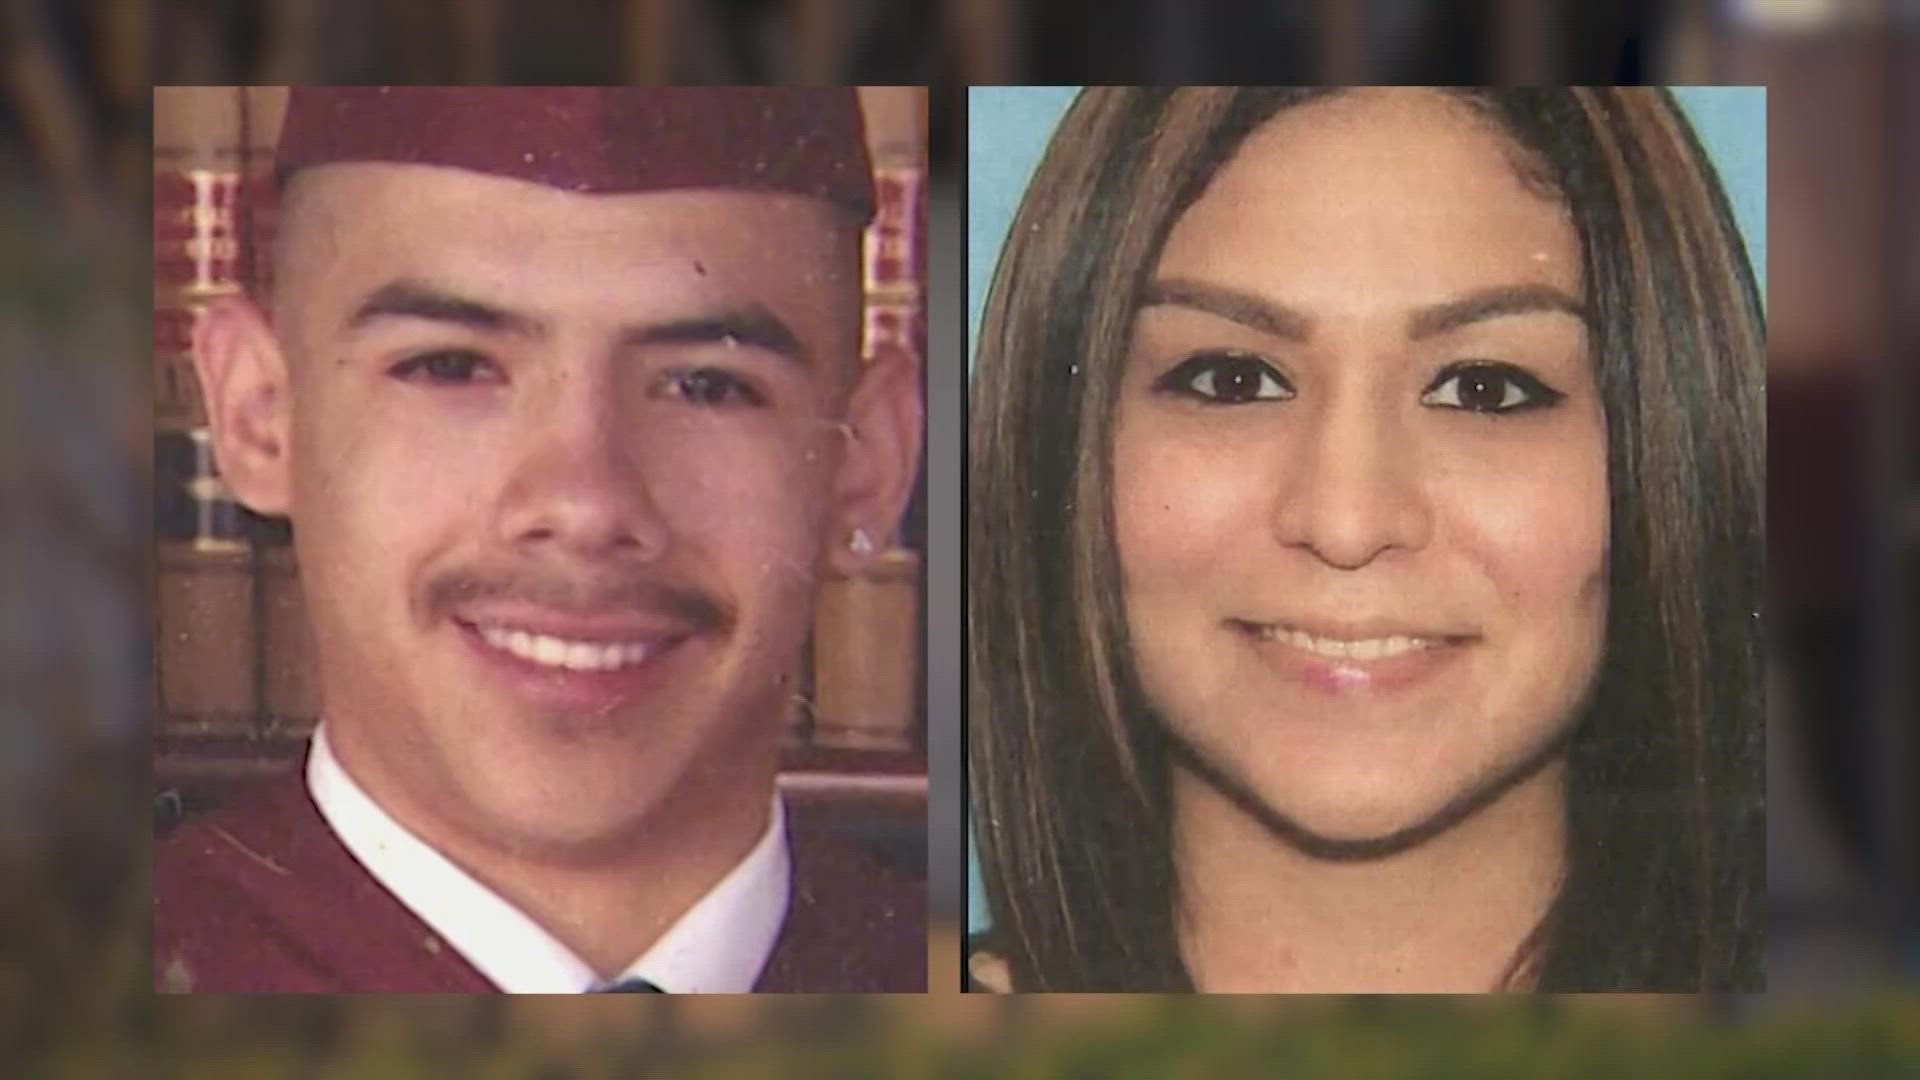 Houston police said two men are in custody and charged in connection with the shooting deaths of Robert Cerda, 29, and Rachel Delarosa, 34